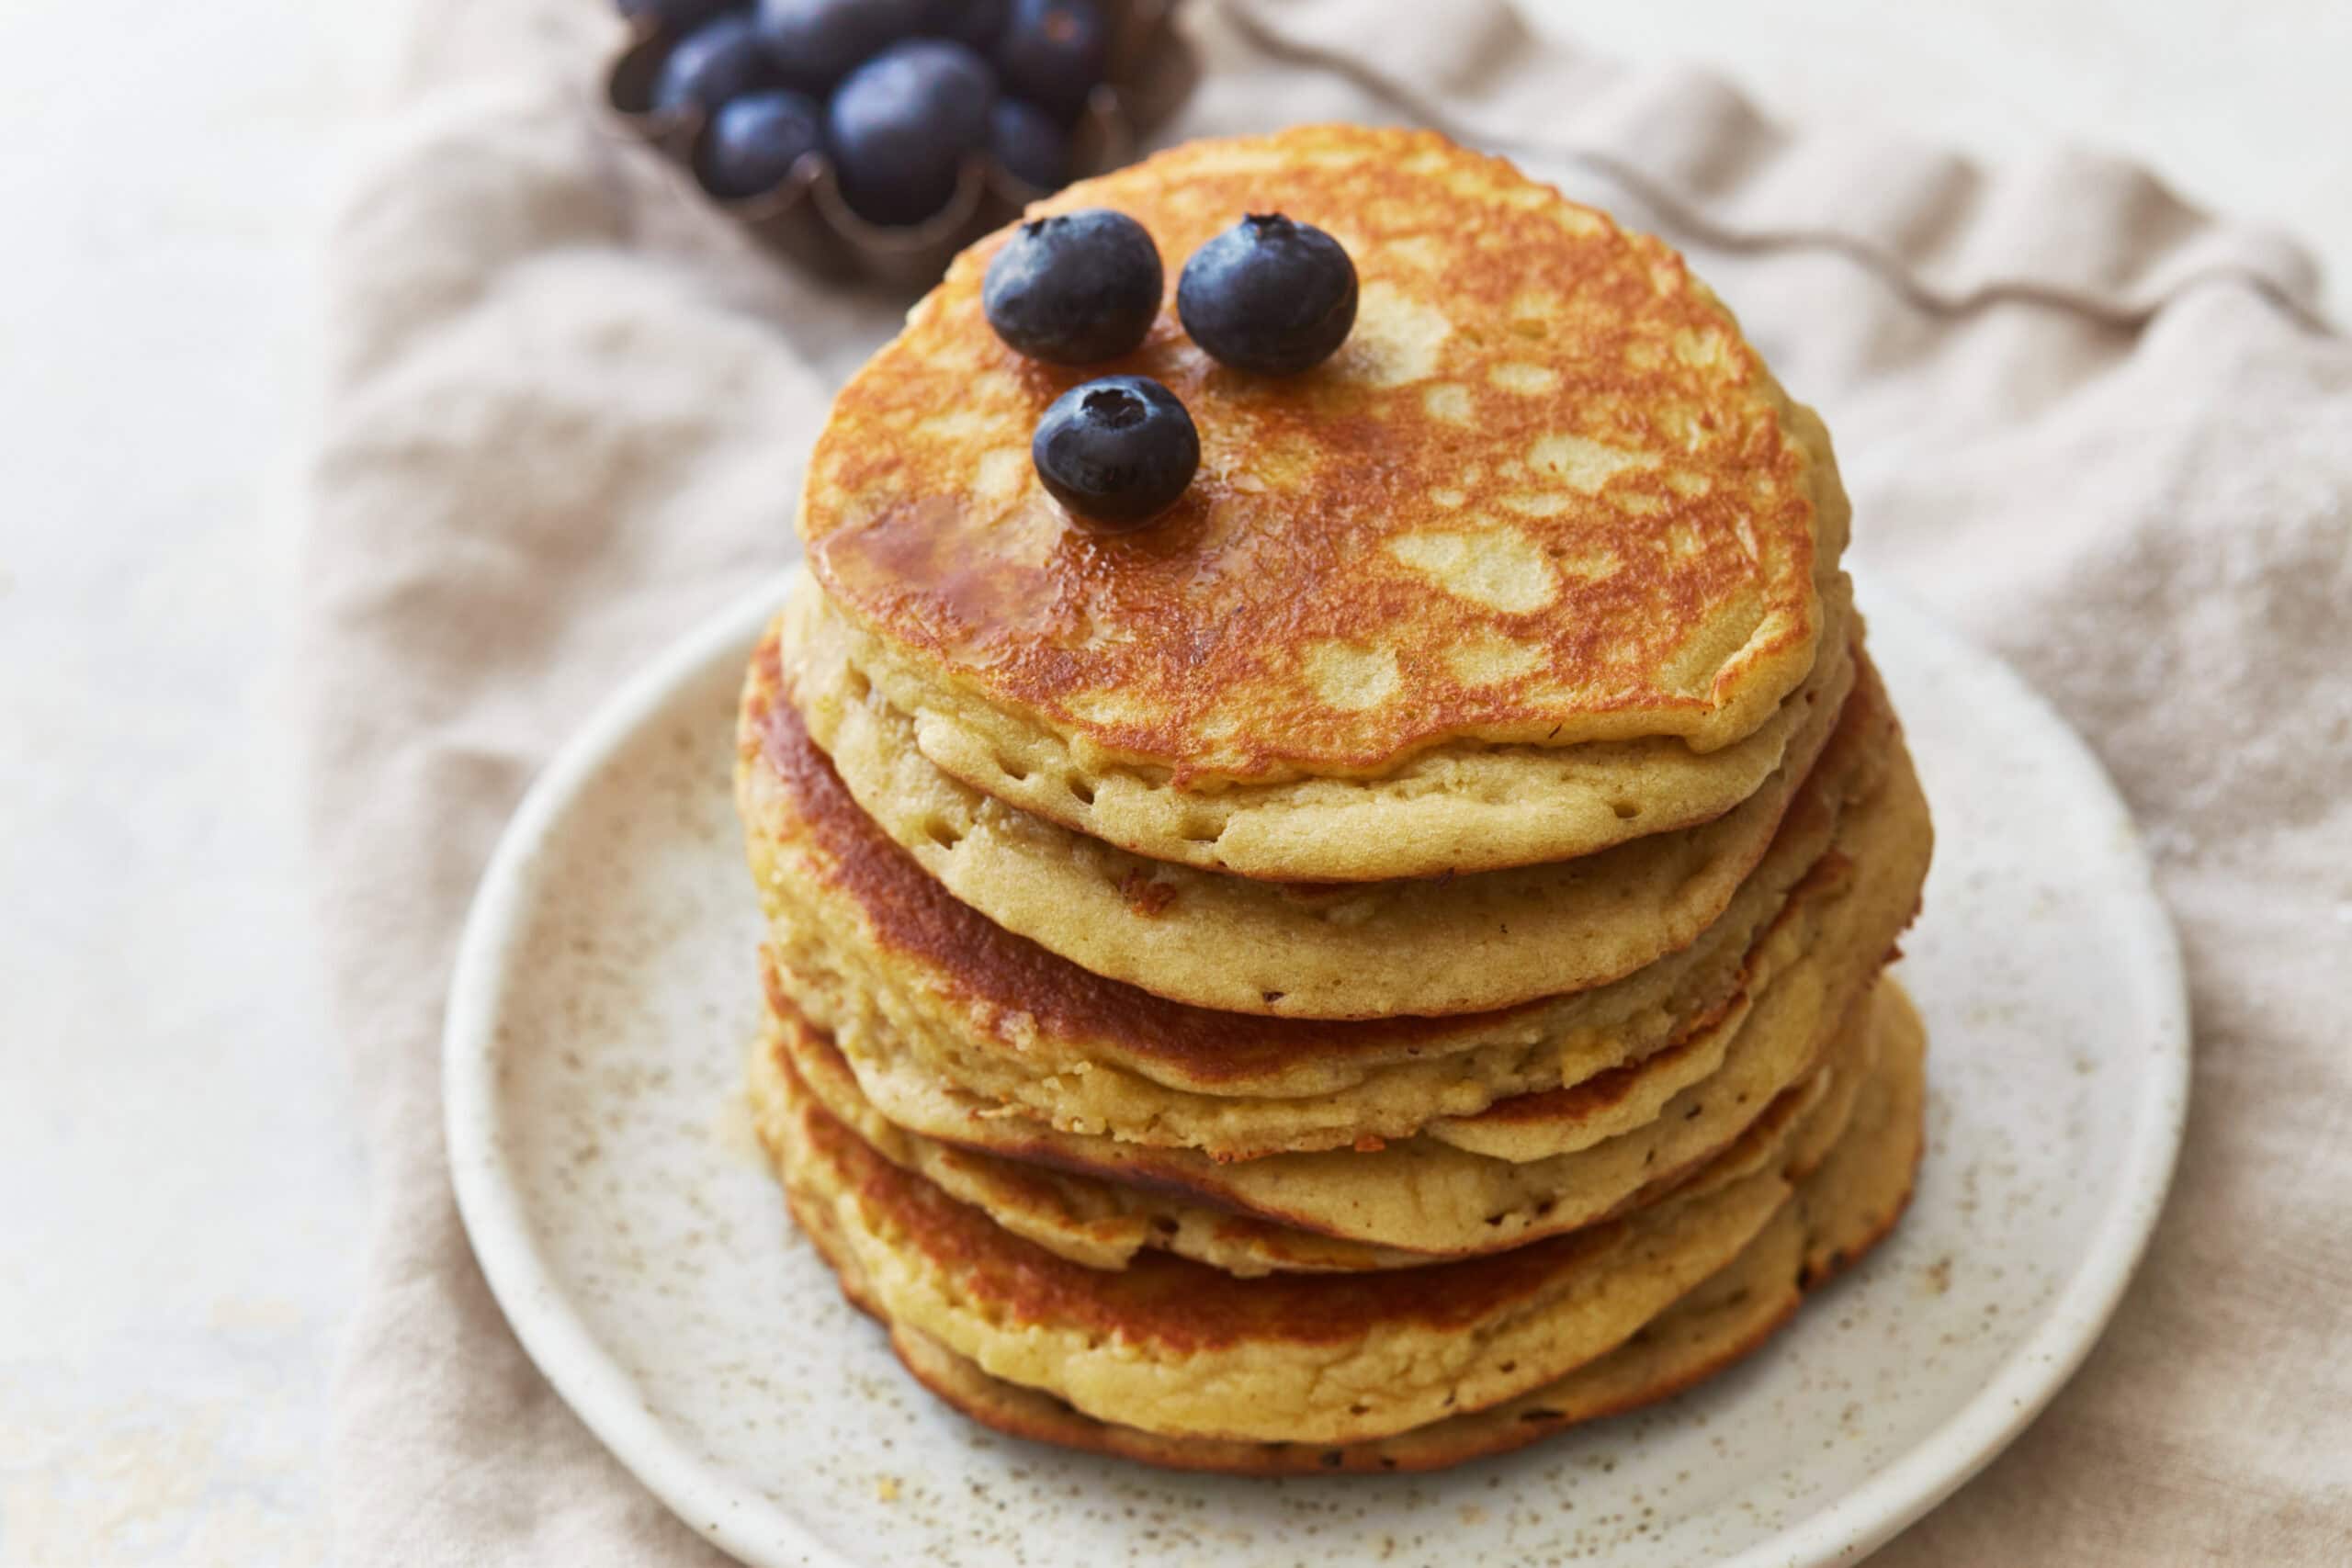 three-quarters view of a stack of almond flour pancakes on a plate with blueberries.